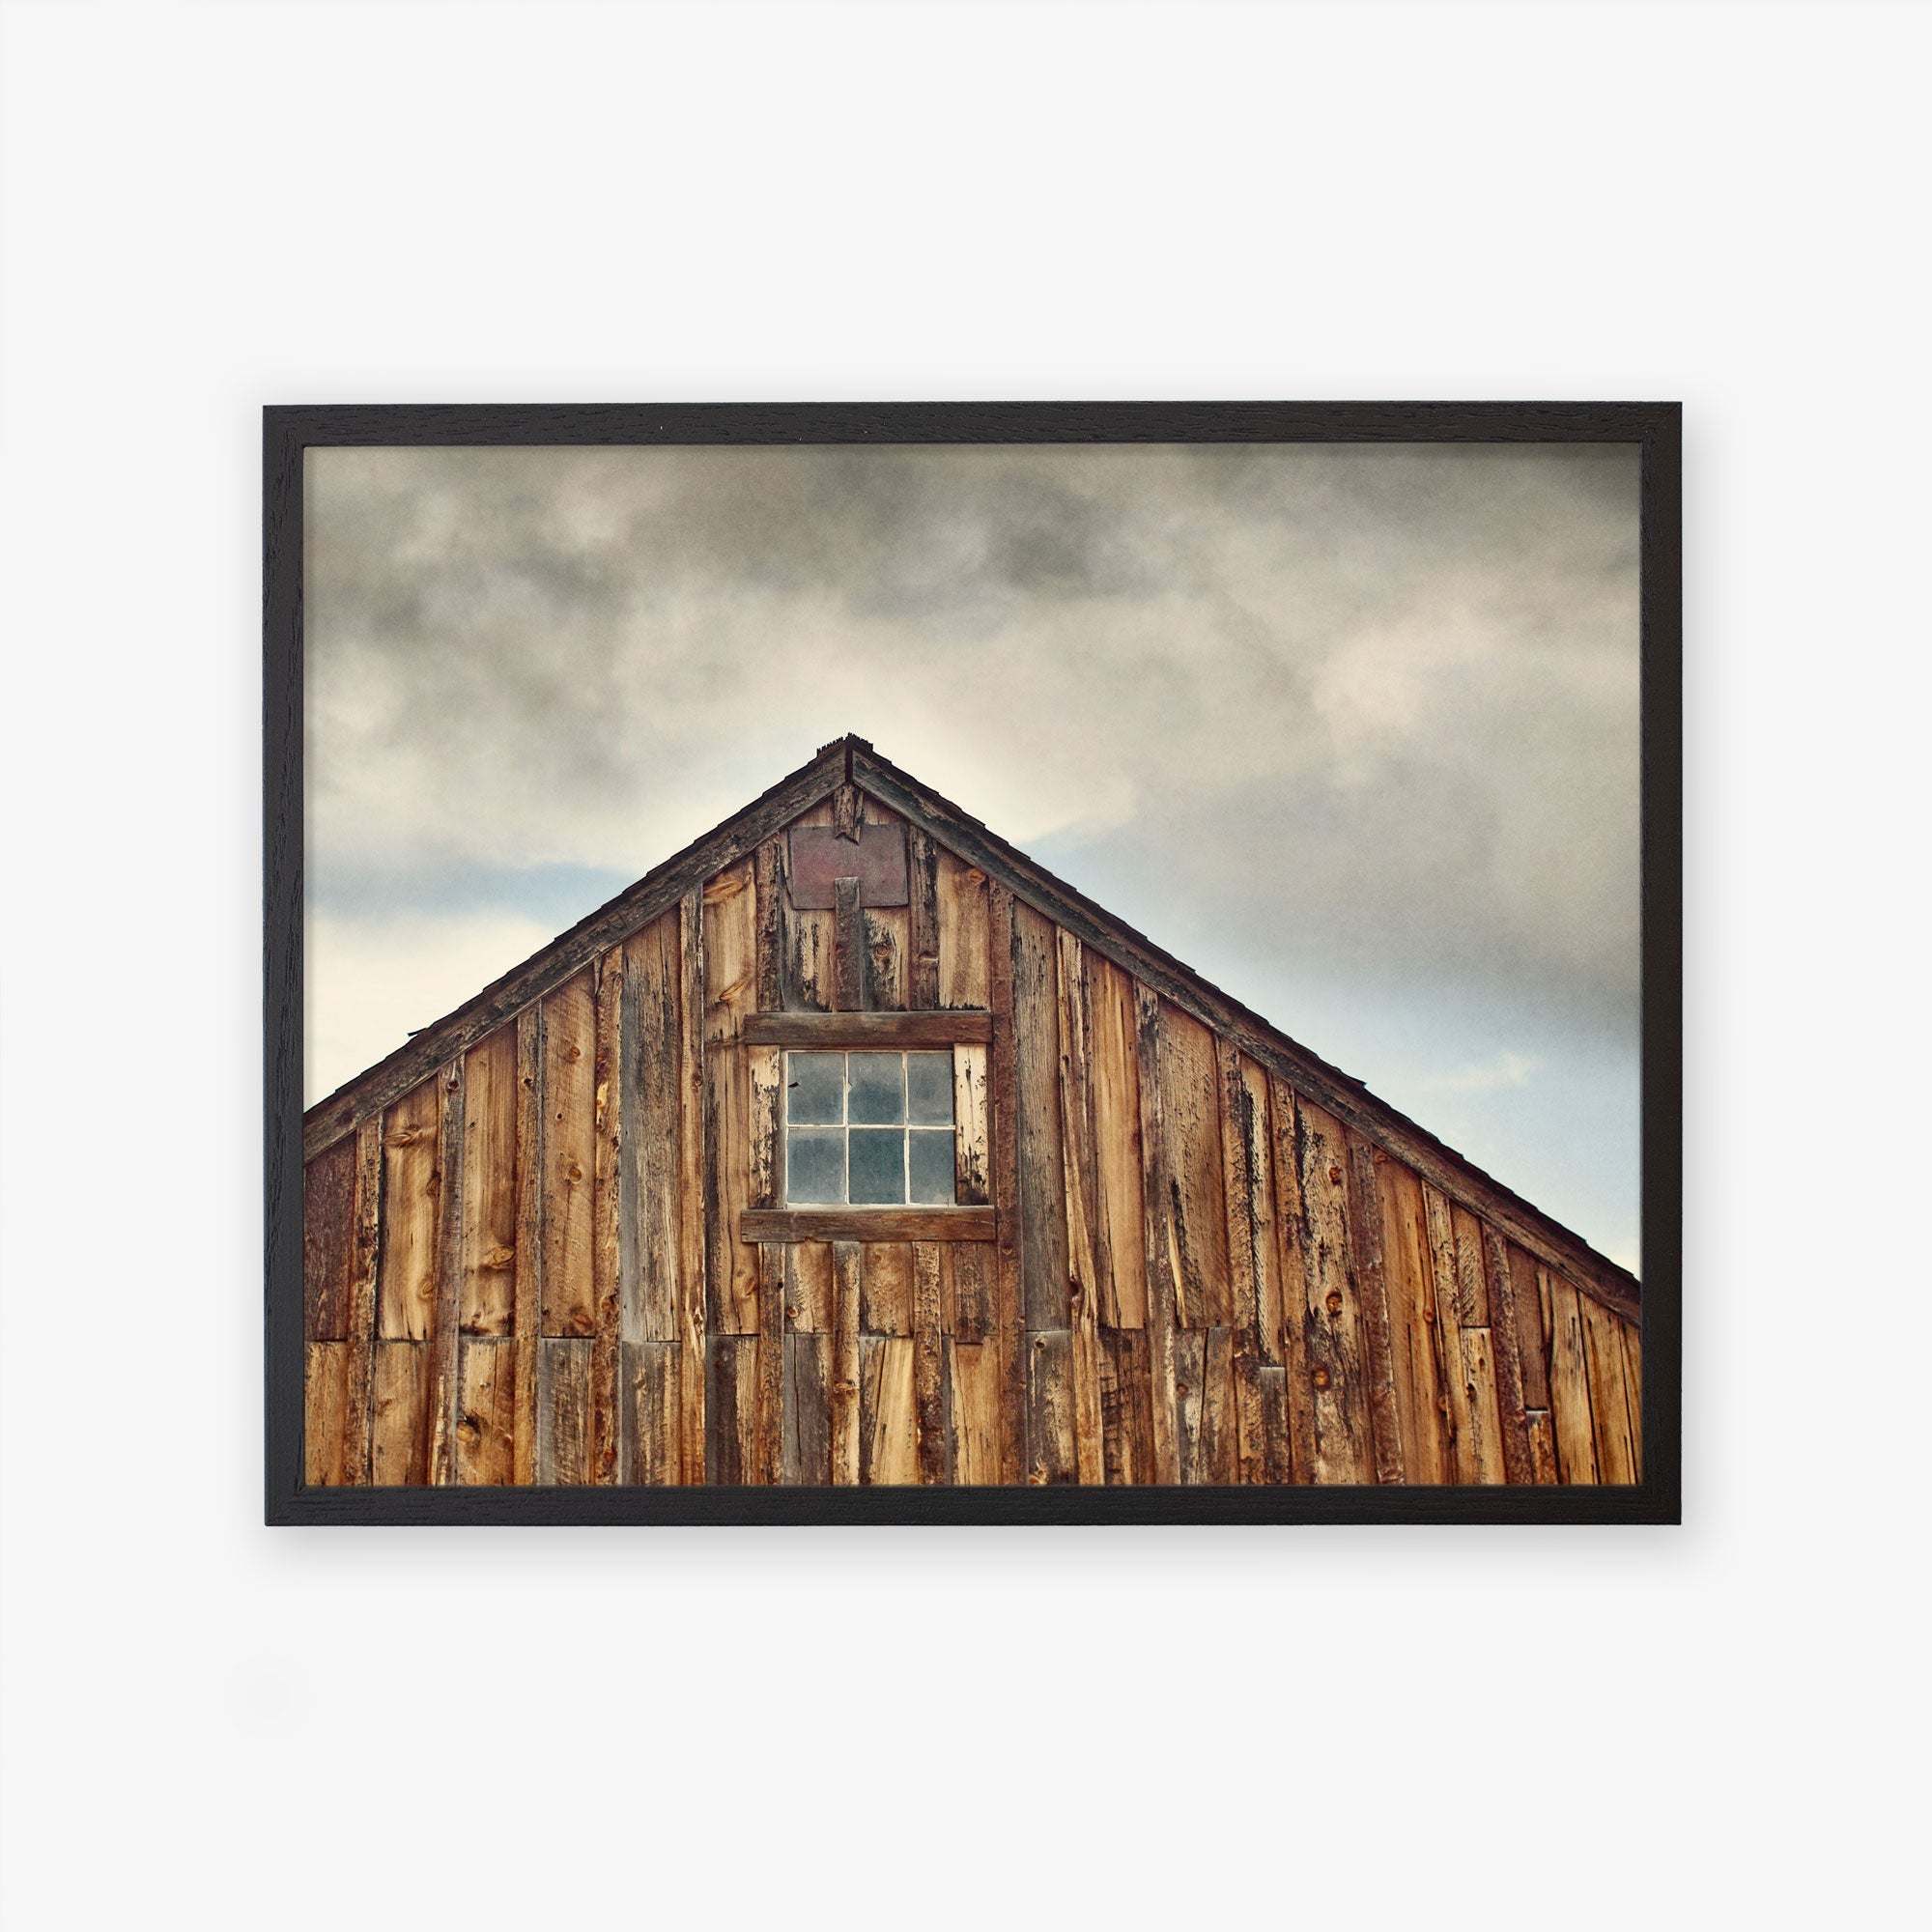 A framed photograph of the upper part of an old wooden barn with a single window, set against a cloudy sky, printed on archival photographic paper - Offley Green&#39;s Farmhouse Rustic Print, &#39;Old Barn at Bodie&#39;.